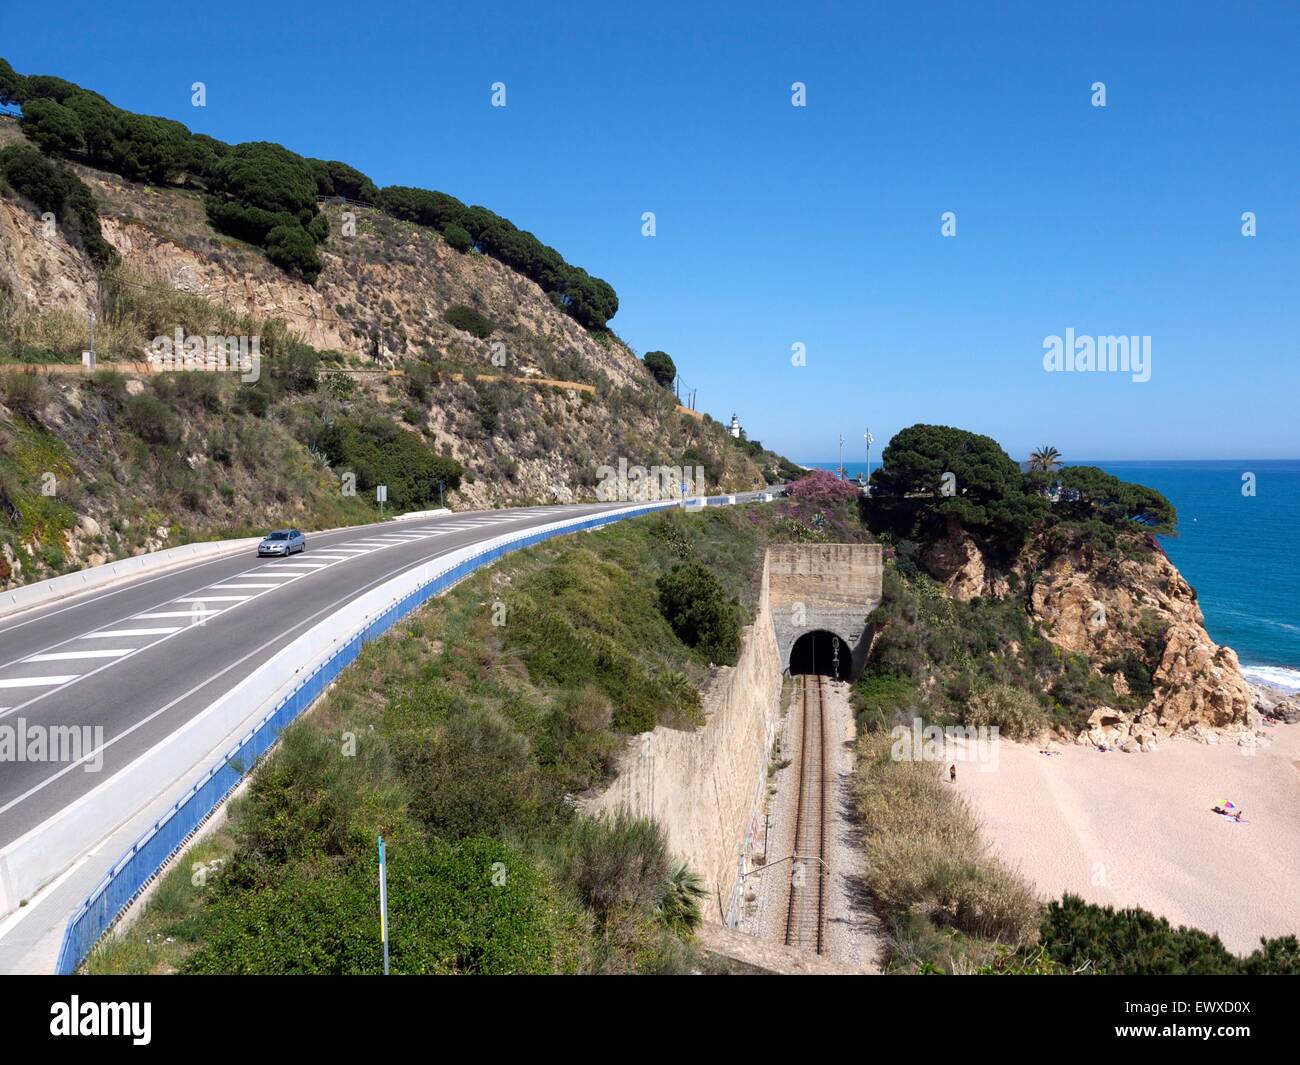 Beach with a railway running through a tunnel and a road above Stock Photo